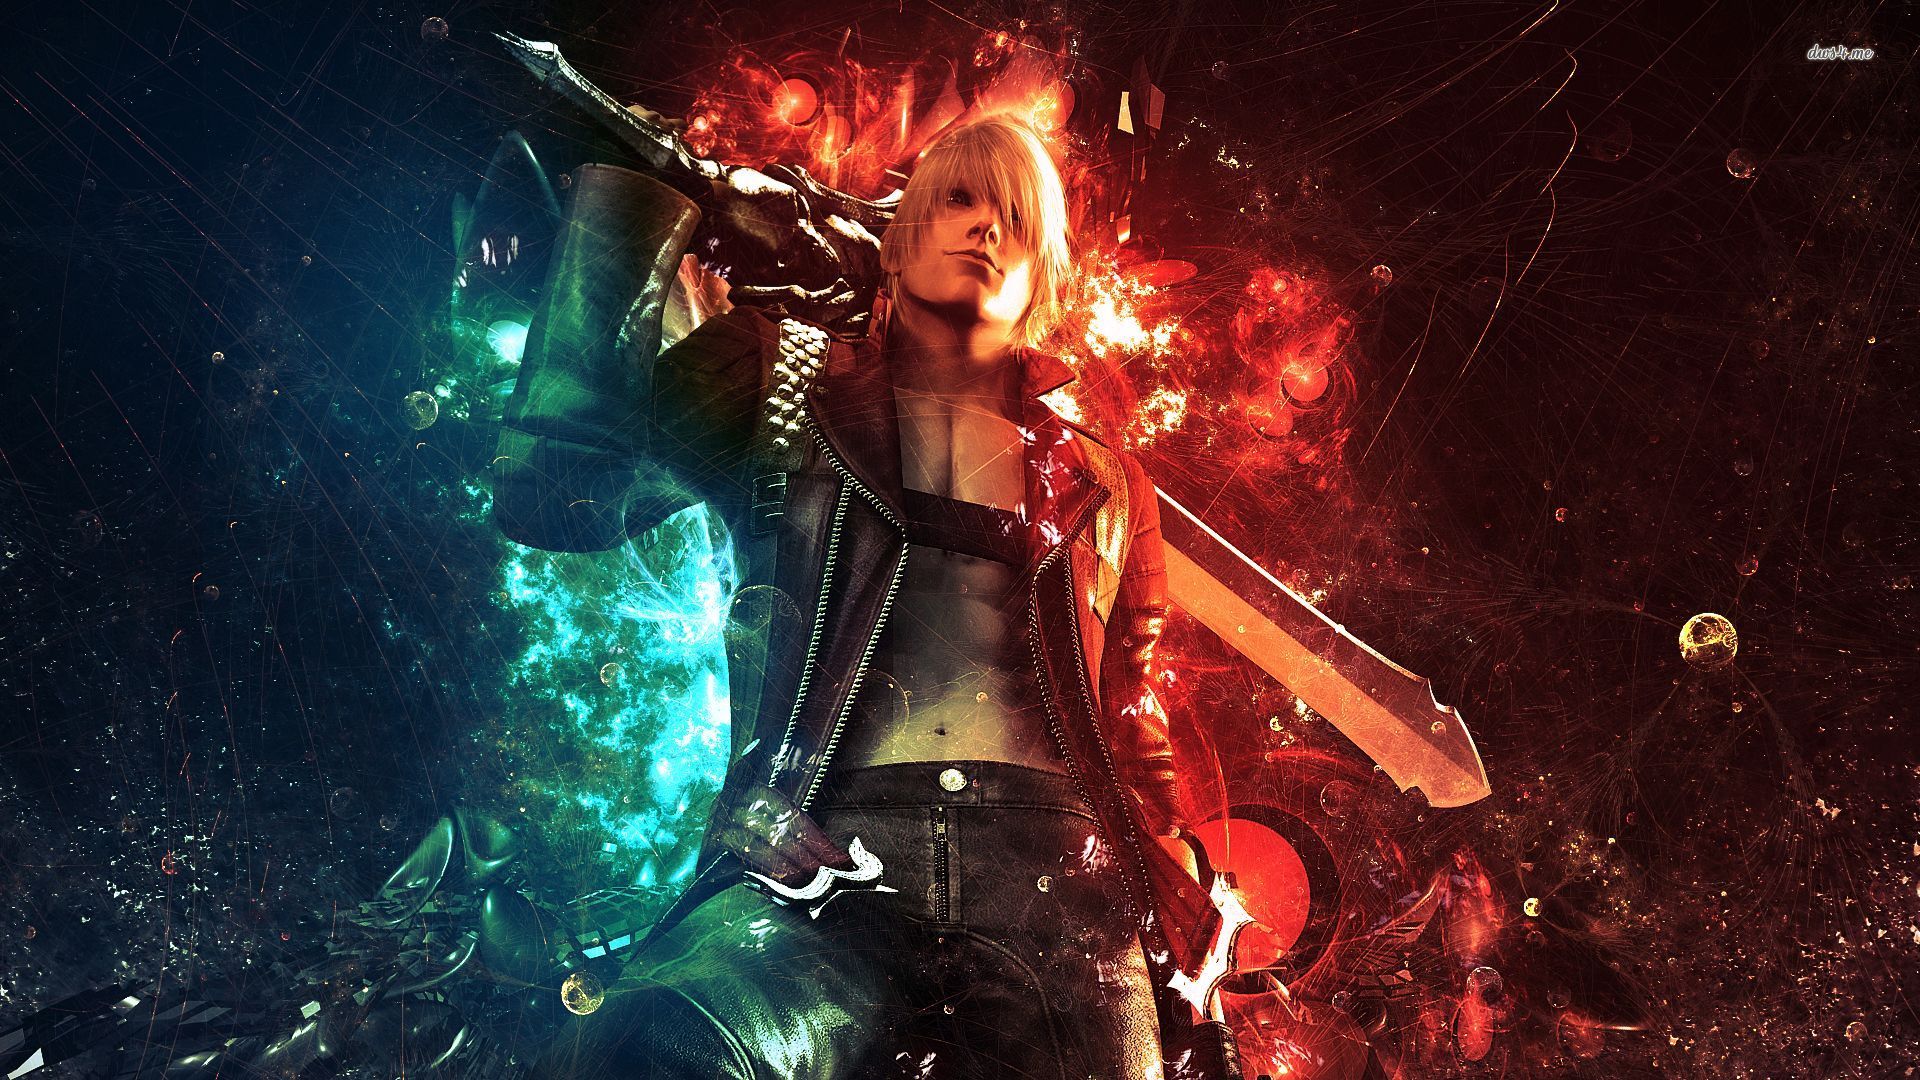 6426 devil may cry 3 dante 1920x1080 game wallpaper Evil Wallpapers HD